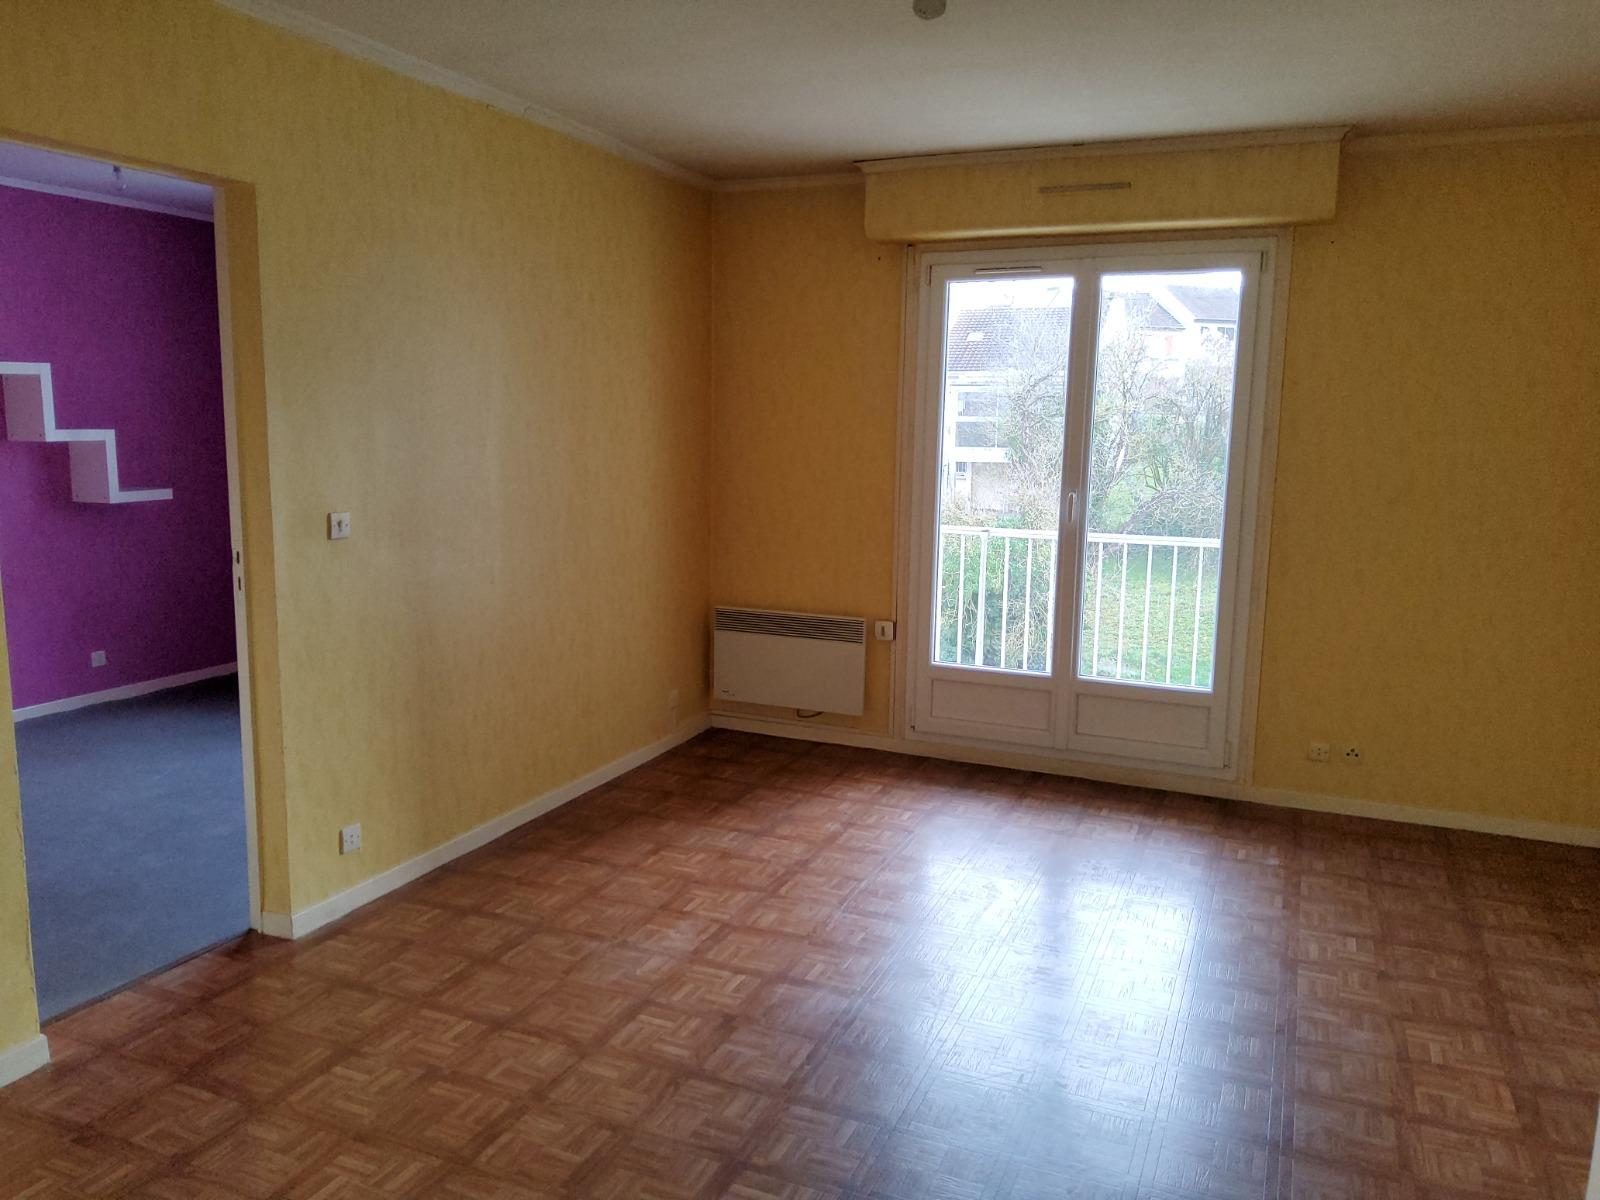 Immobilier vente à EPERNAY Appartement - Type 2